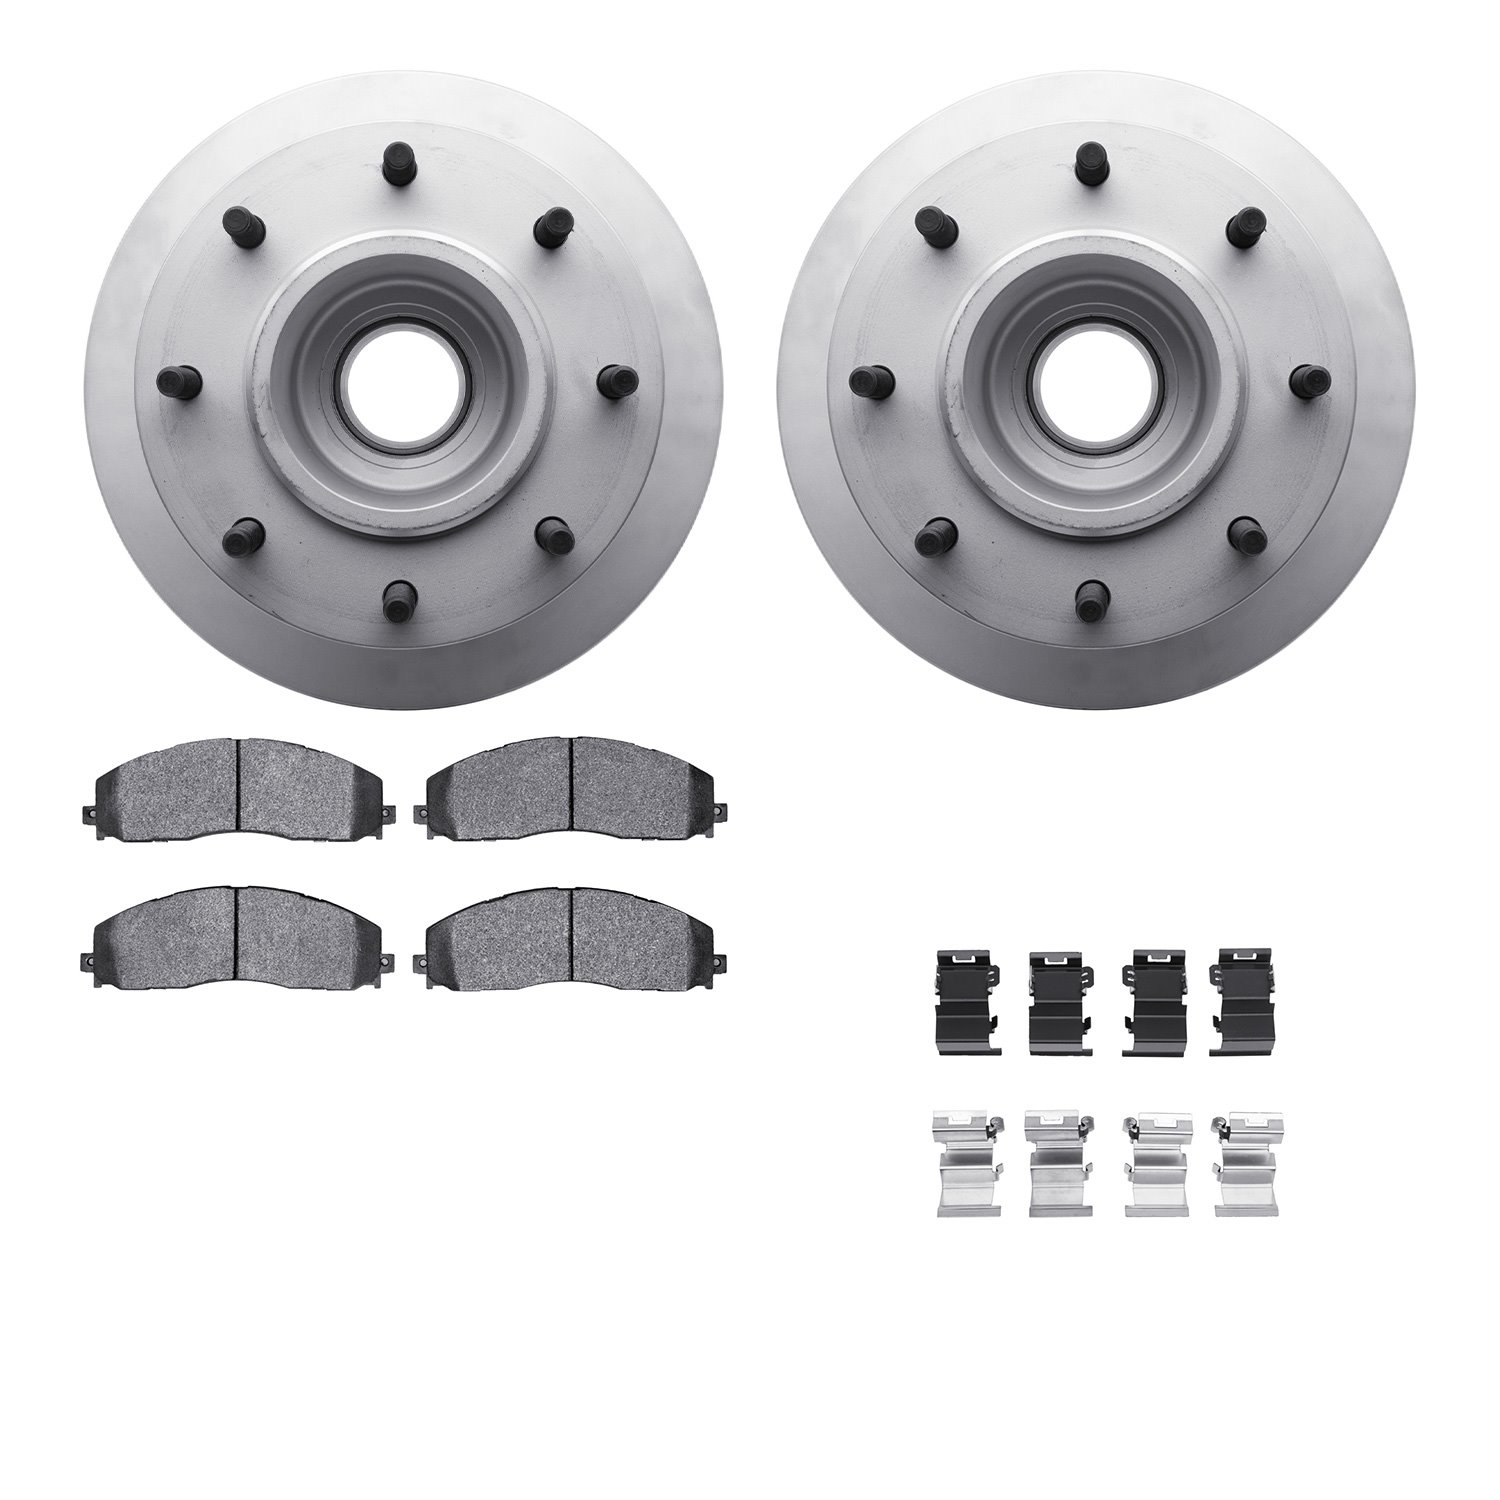 4212-99221 Geospec Brake Rotors w/Heavy-Duty Brake Pads & Hardware, Fits Select Ford/Lincoln/Mercury/Mazda, Position: Front